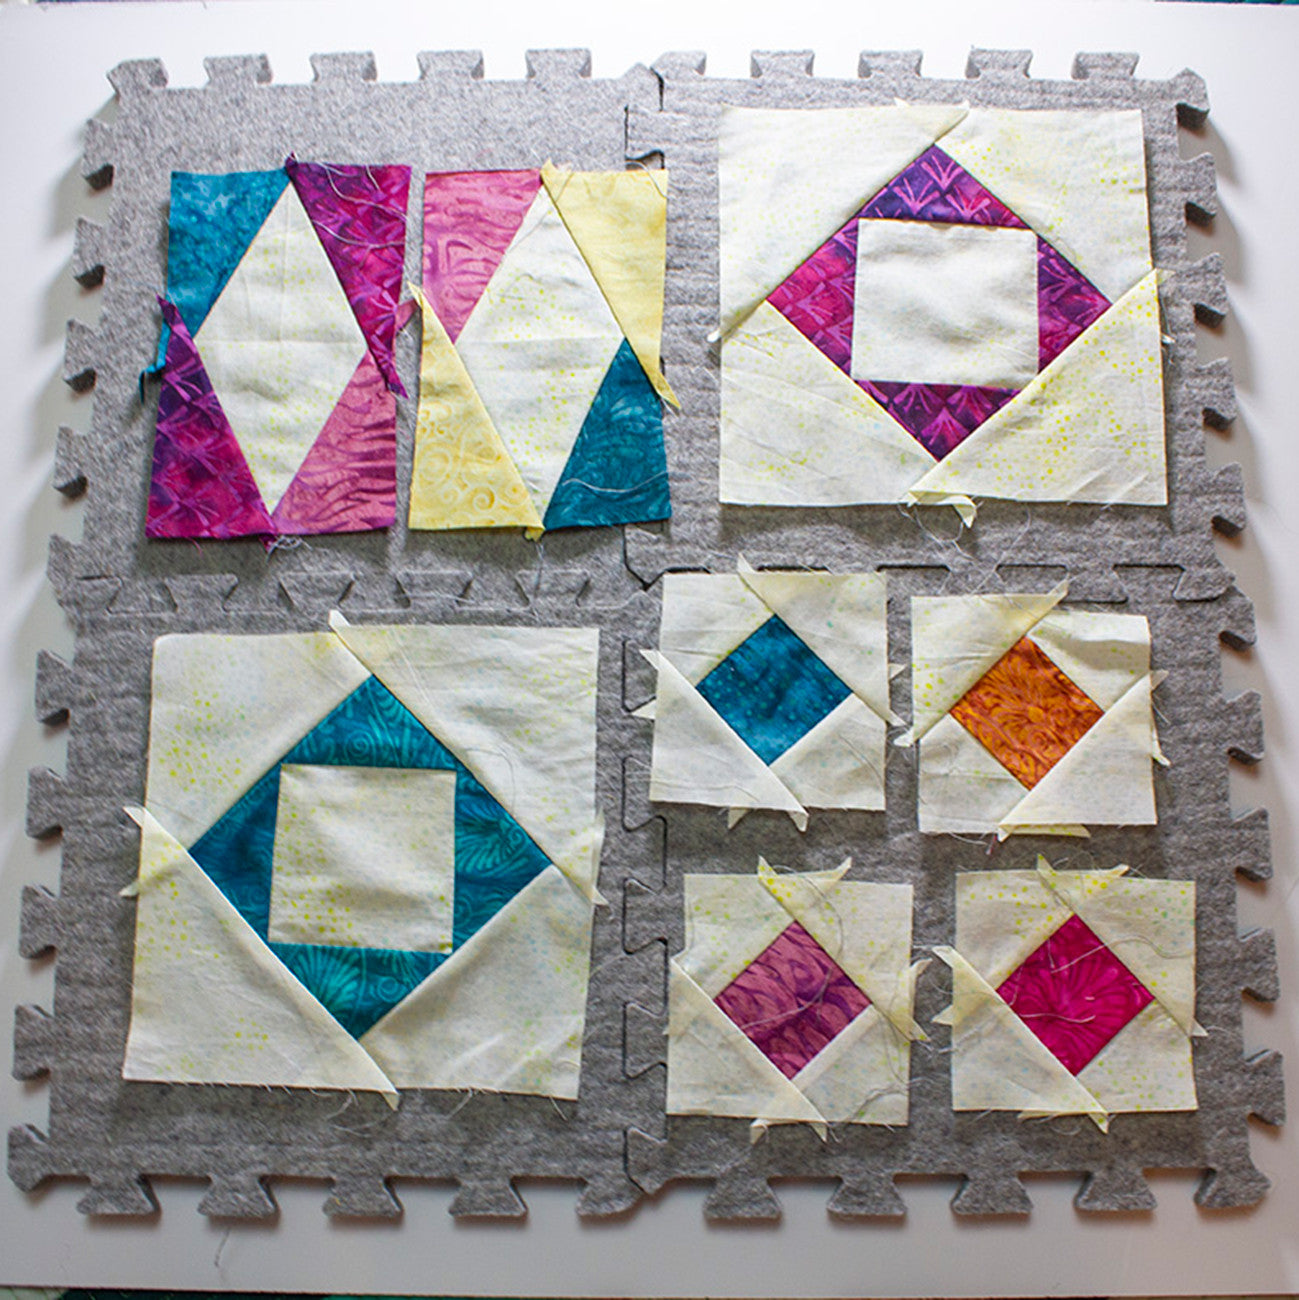 Wool Press 'n Lock Tiles Set of 4 Home Kit from Sewing By Sarah